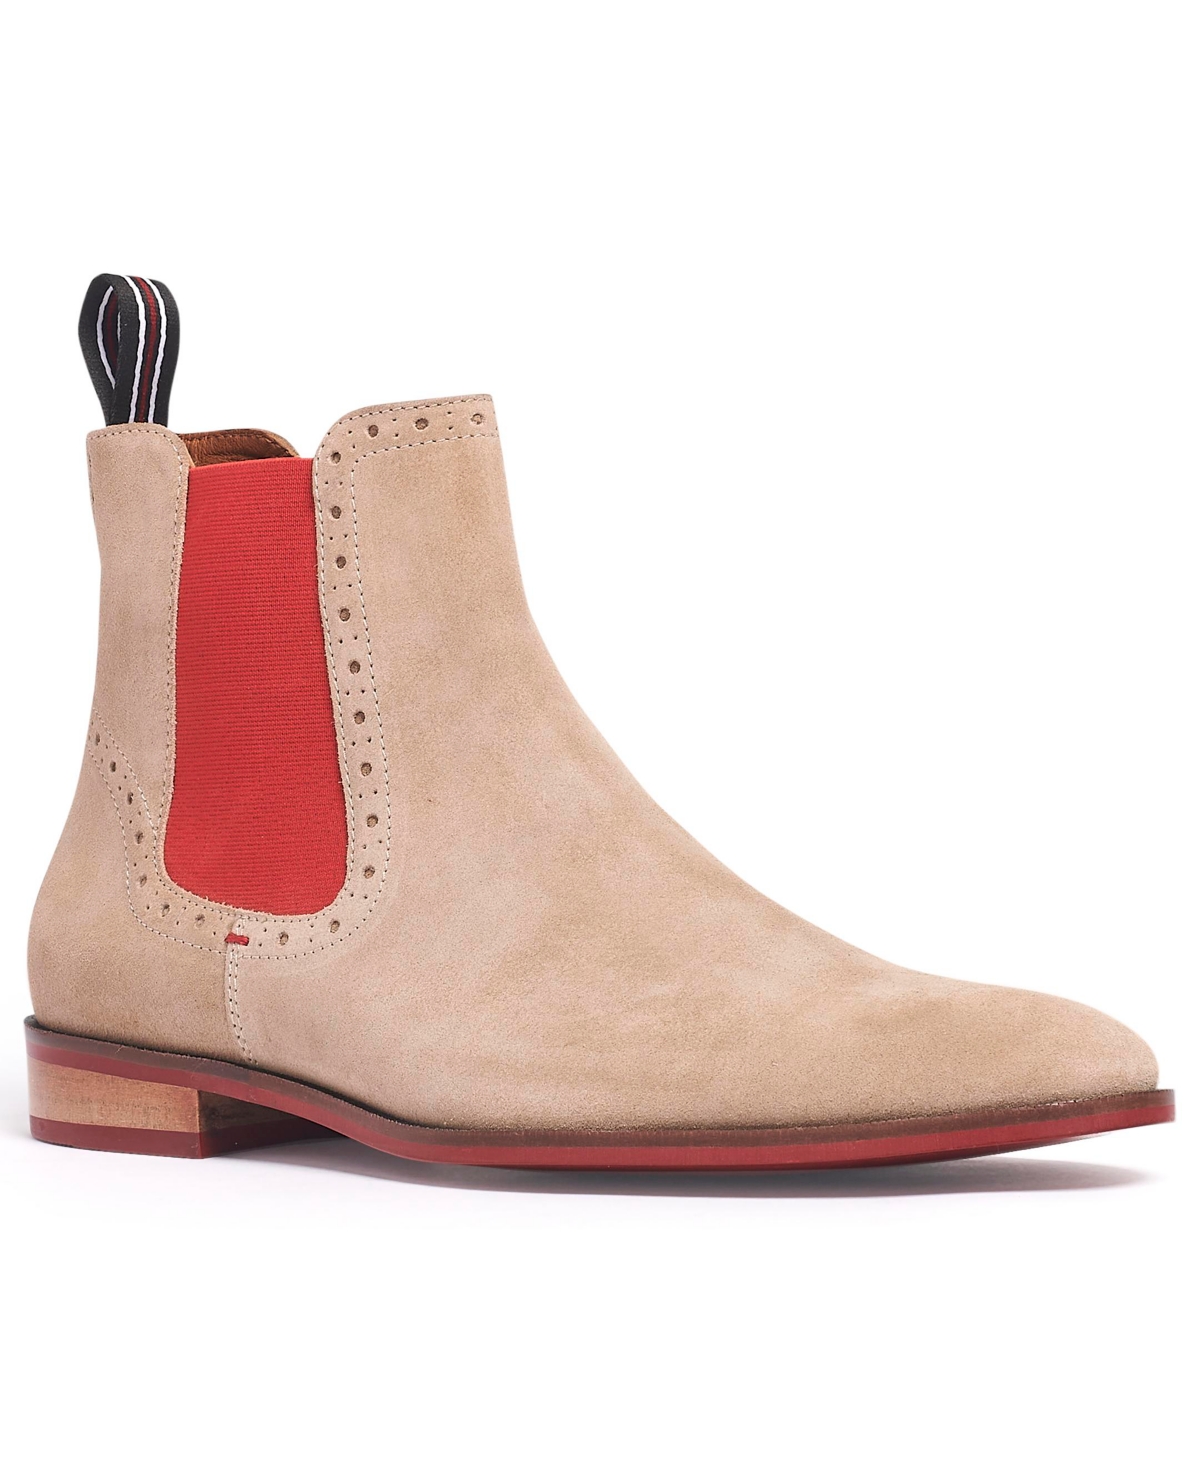 Men's Mantra Chelsea Boots - Chocolate Brown